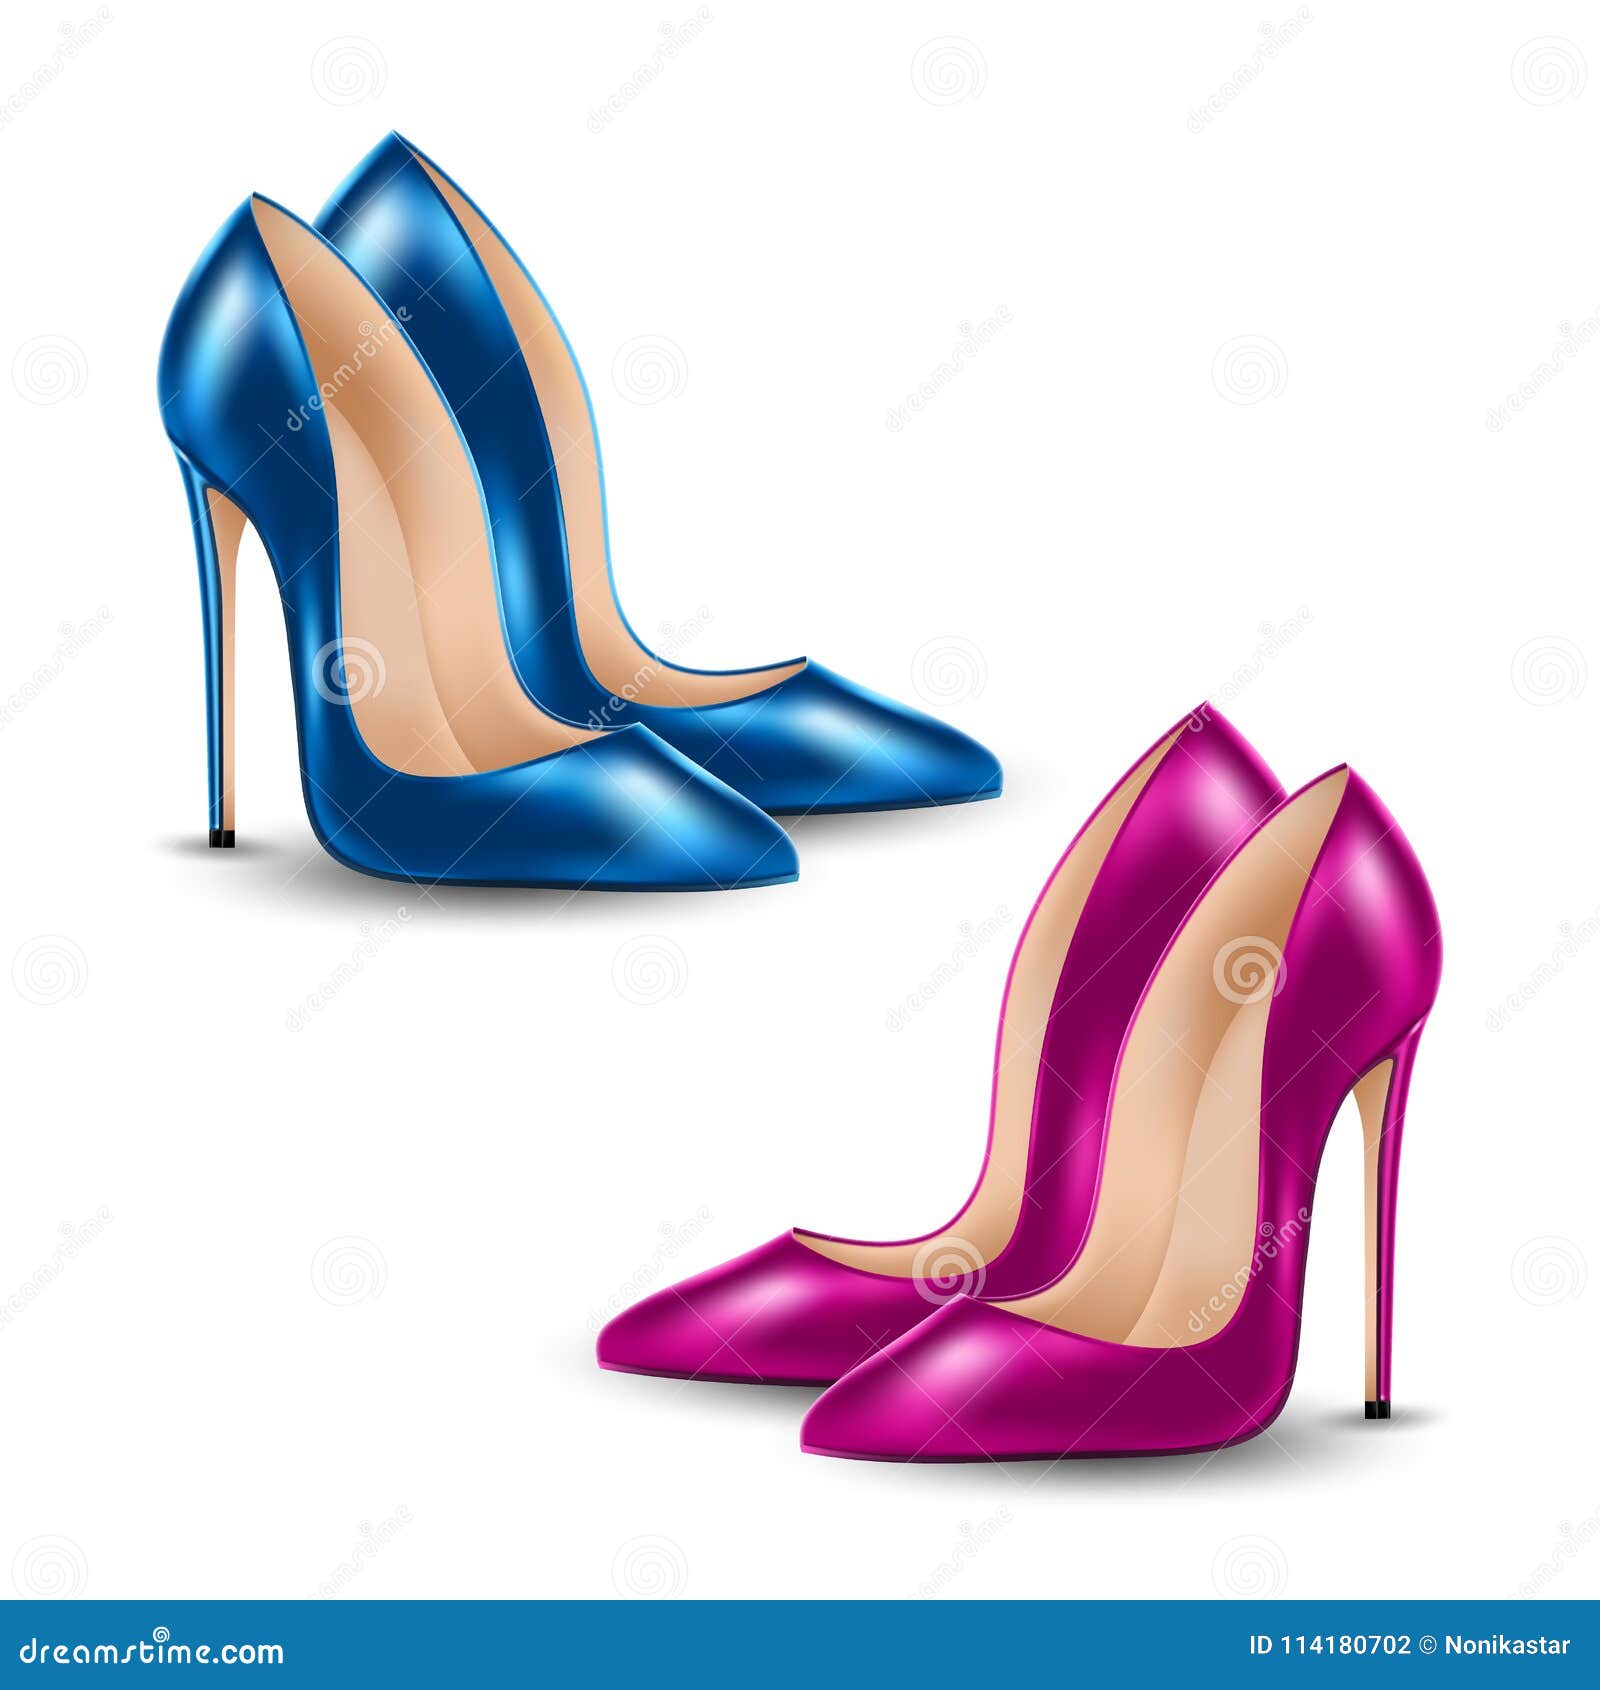 Classic Heels High Shoes Template Stock Illustrations – 25 With Regard To High Heel Shoe Template For Card